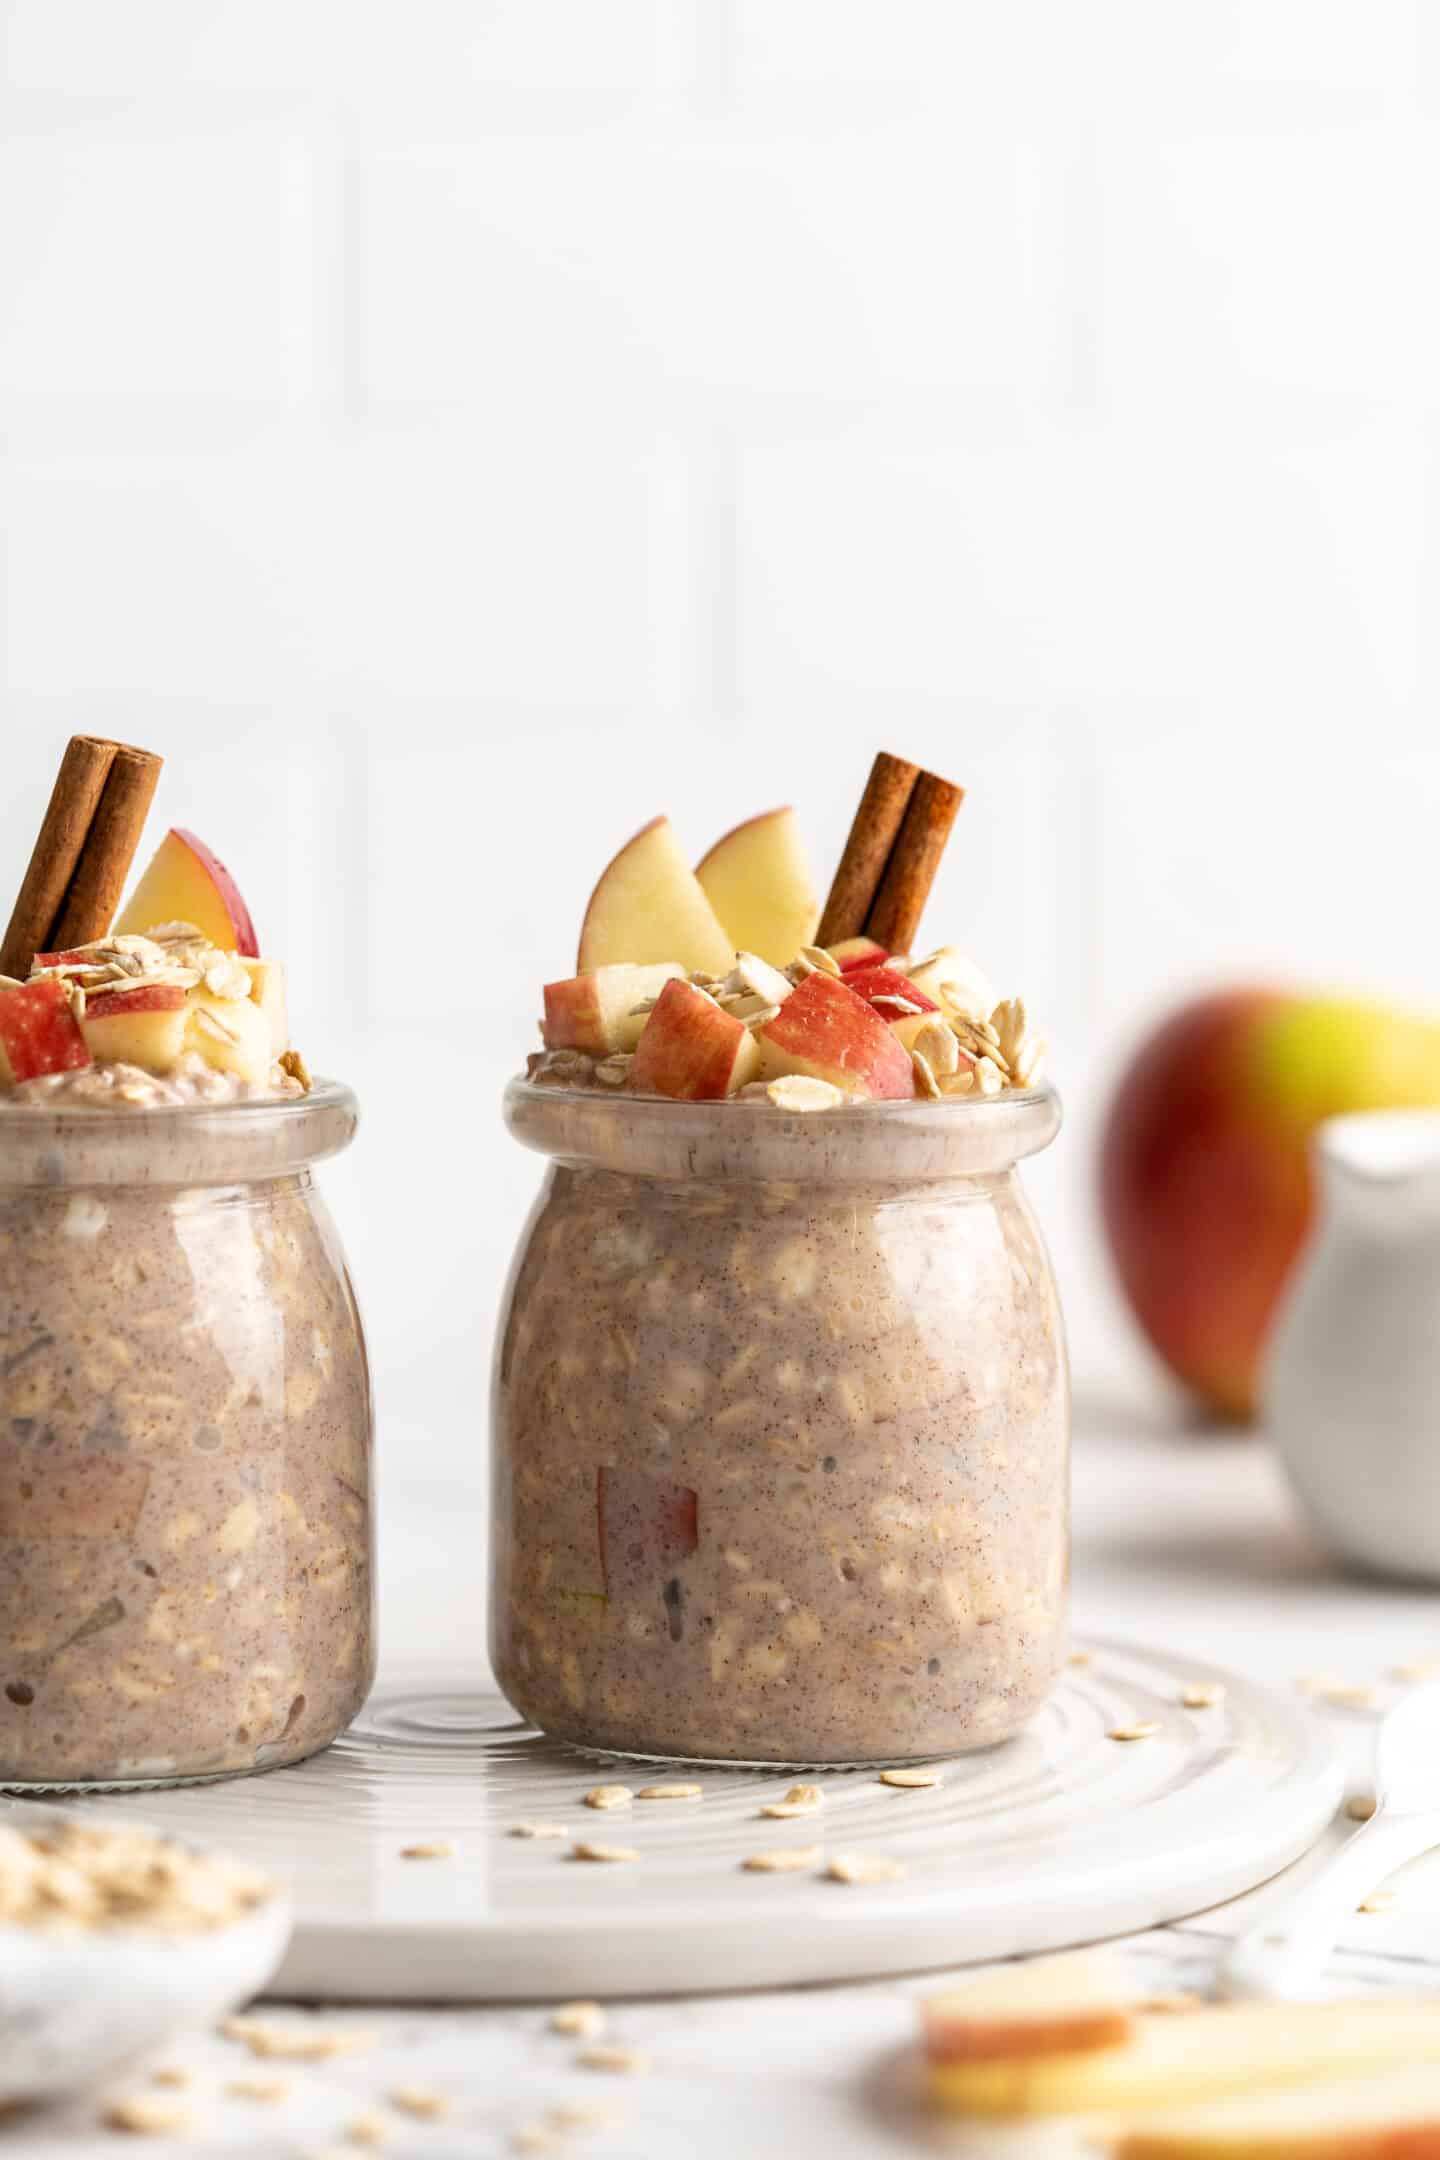 two side by side jars apple overnight oats with cinnamon sticks, oats and apples topping them